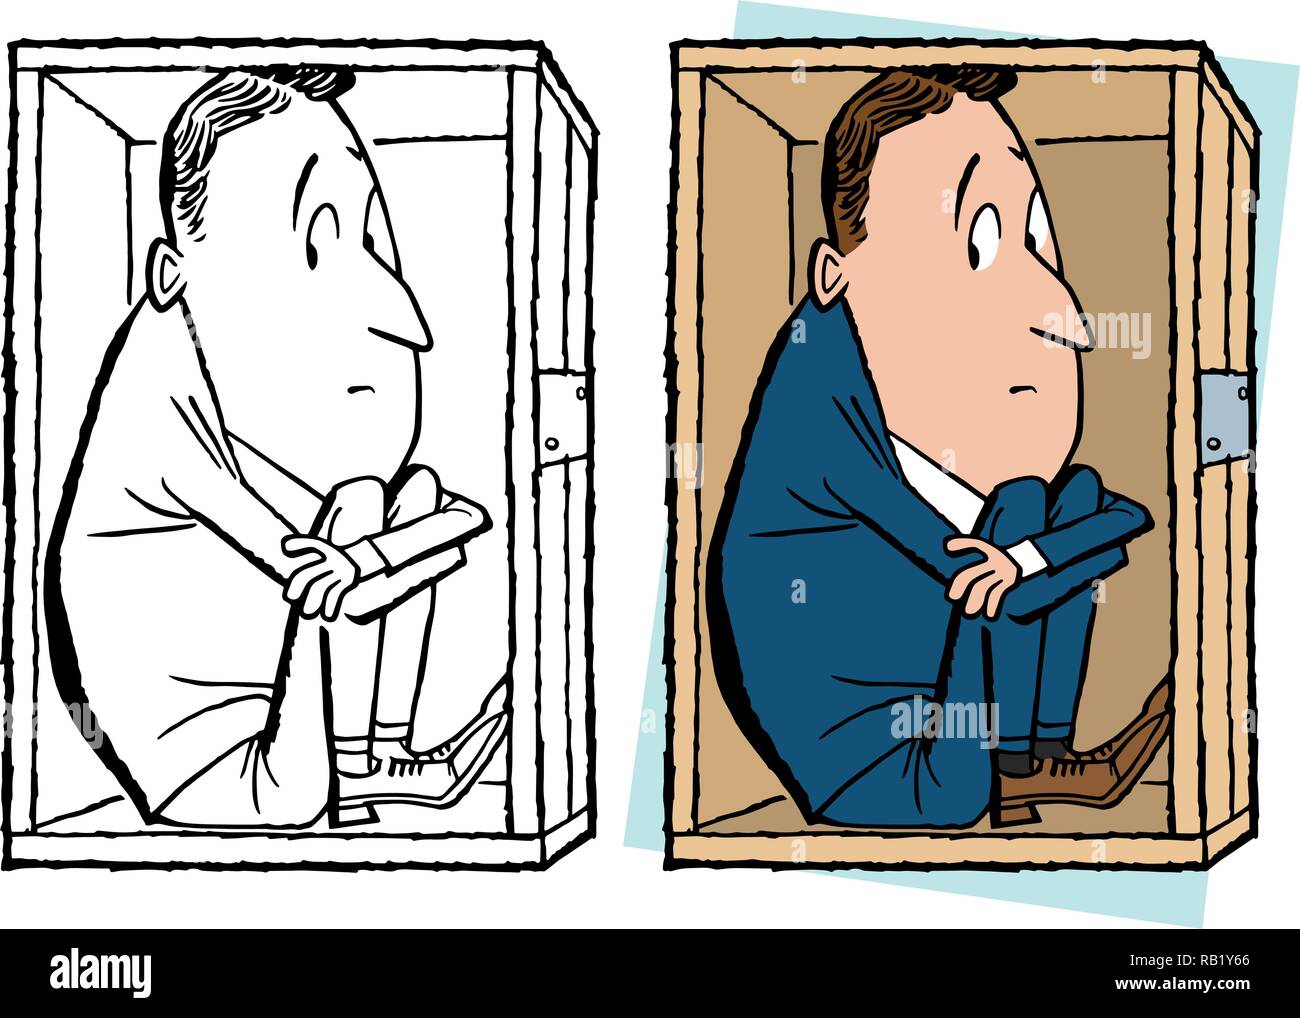 A man trapped in a tight confining box feeling claustrophobic. Stock Vector